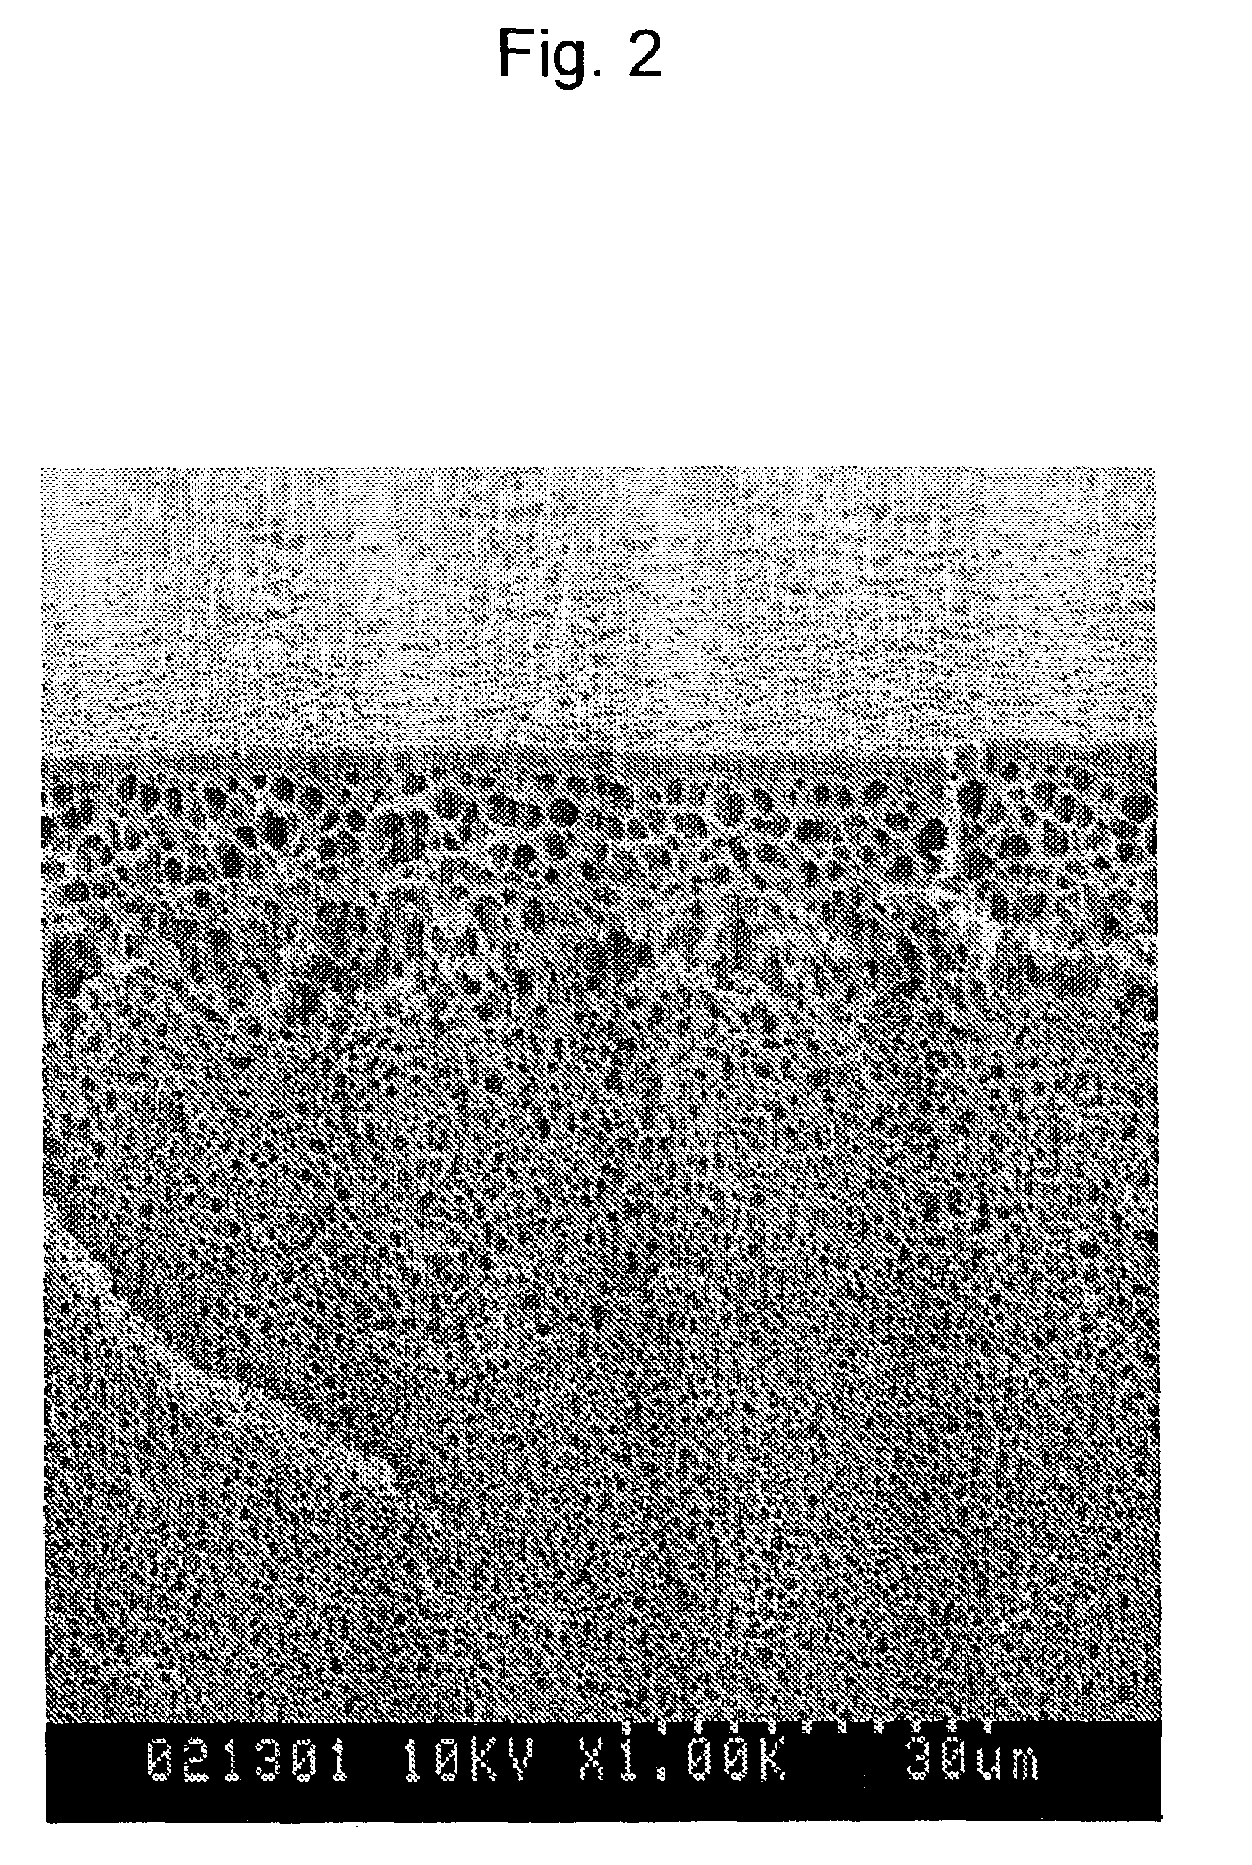 Porous membrane and method for manufacturing the same